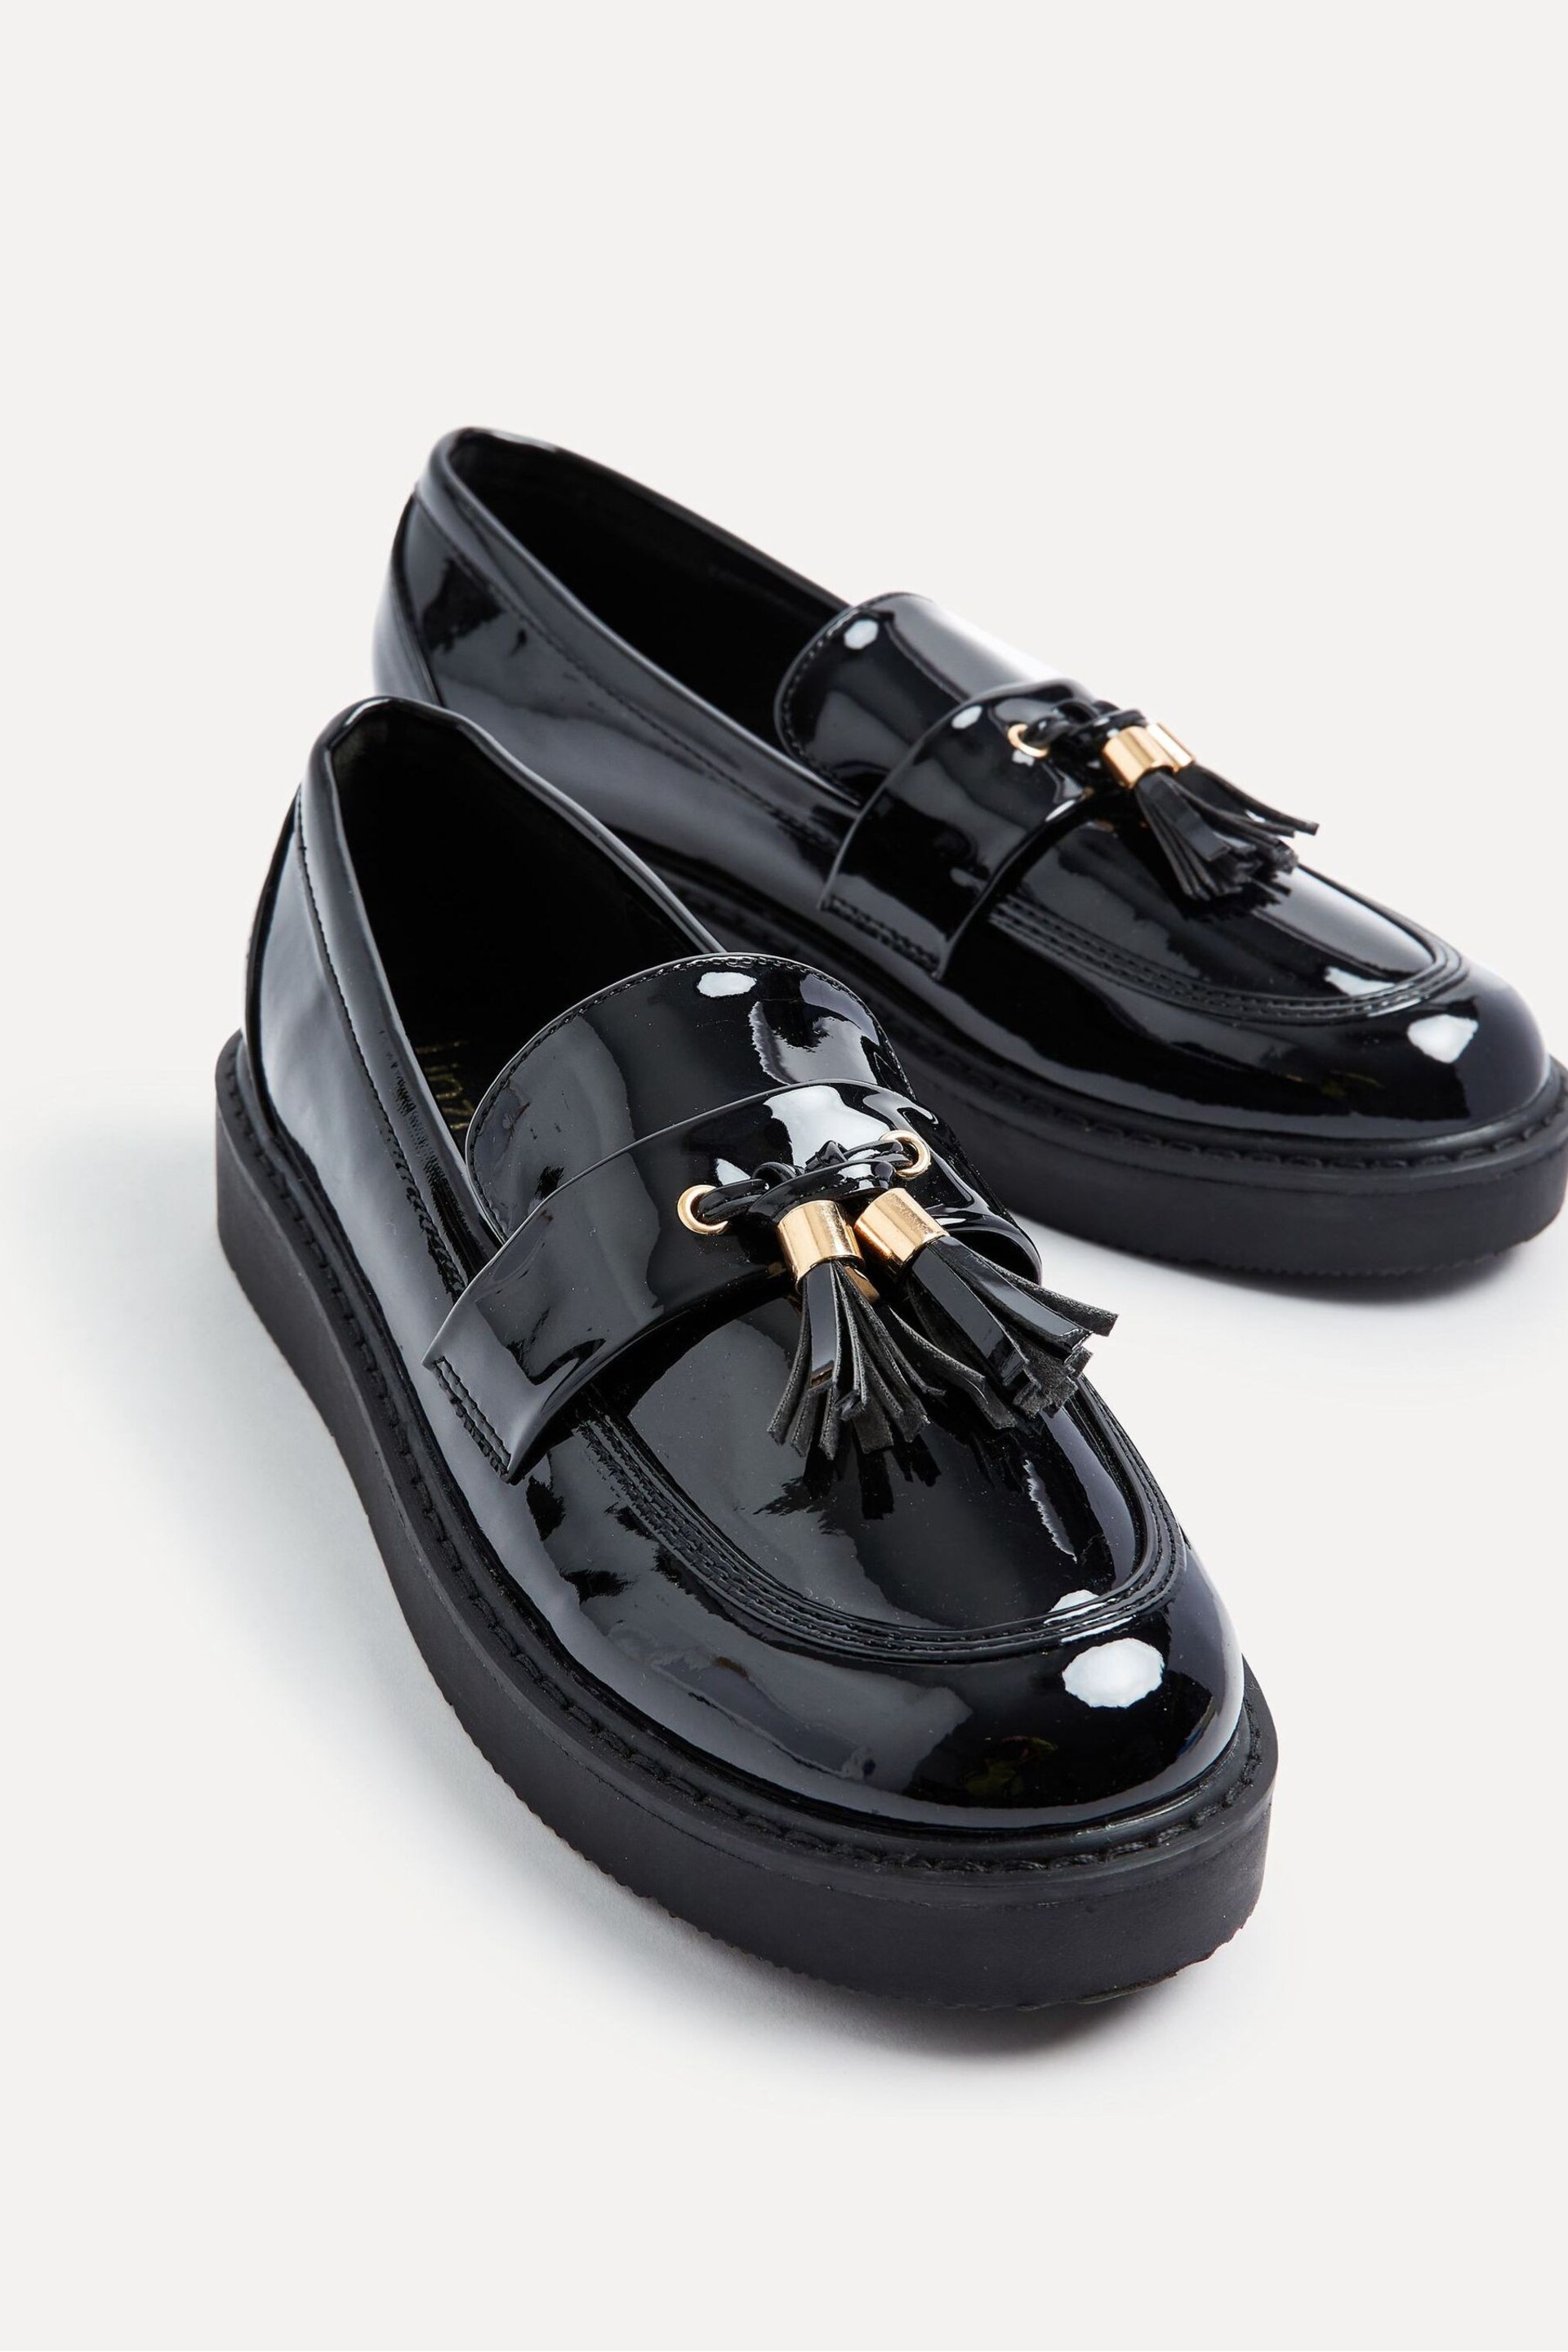 Linzi Black Gemina Platform Loafers with Tassels And Gold Detail - Image 4 of 5